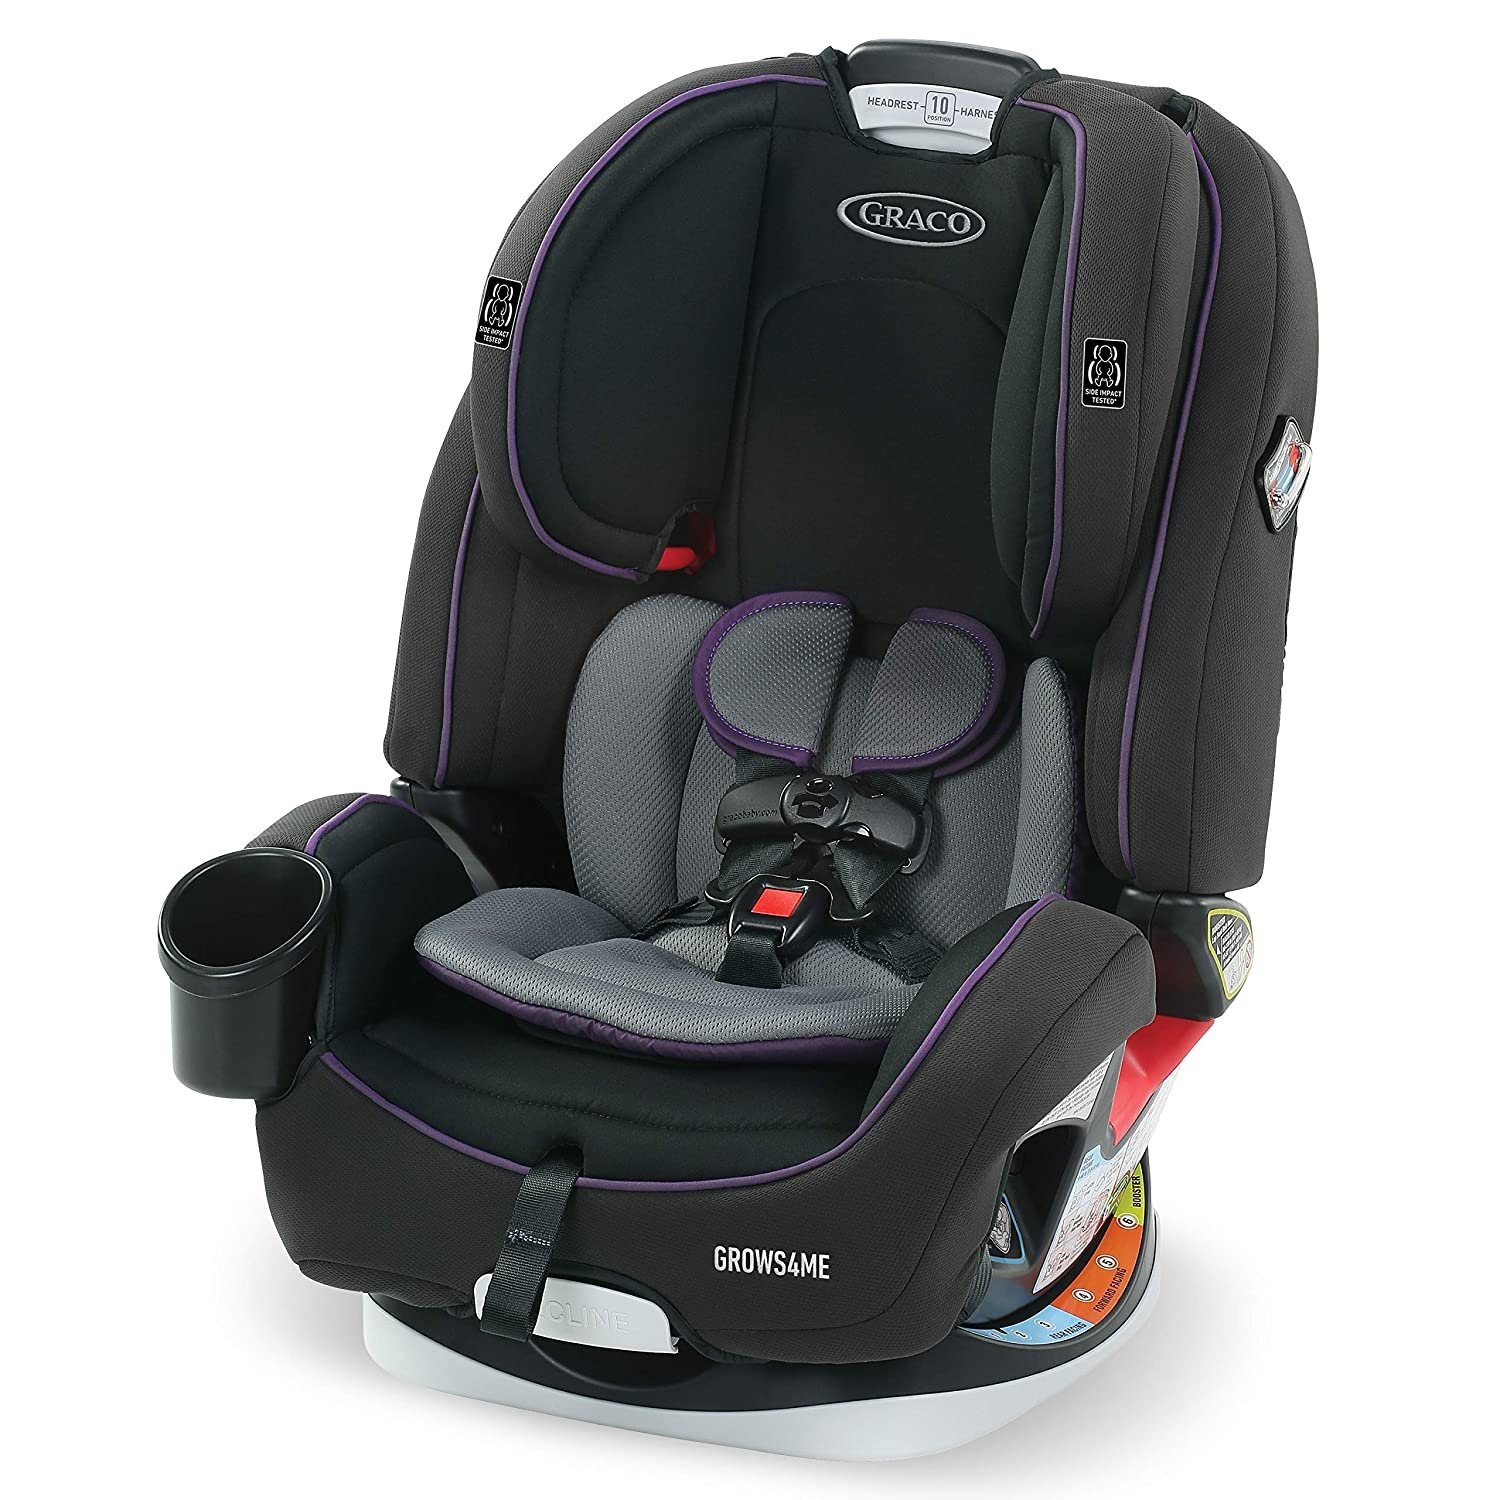 Graco Grows4Me 4 in 1 Car Seat, Infant to Toddler Car Seat with 4 Modes